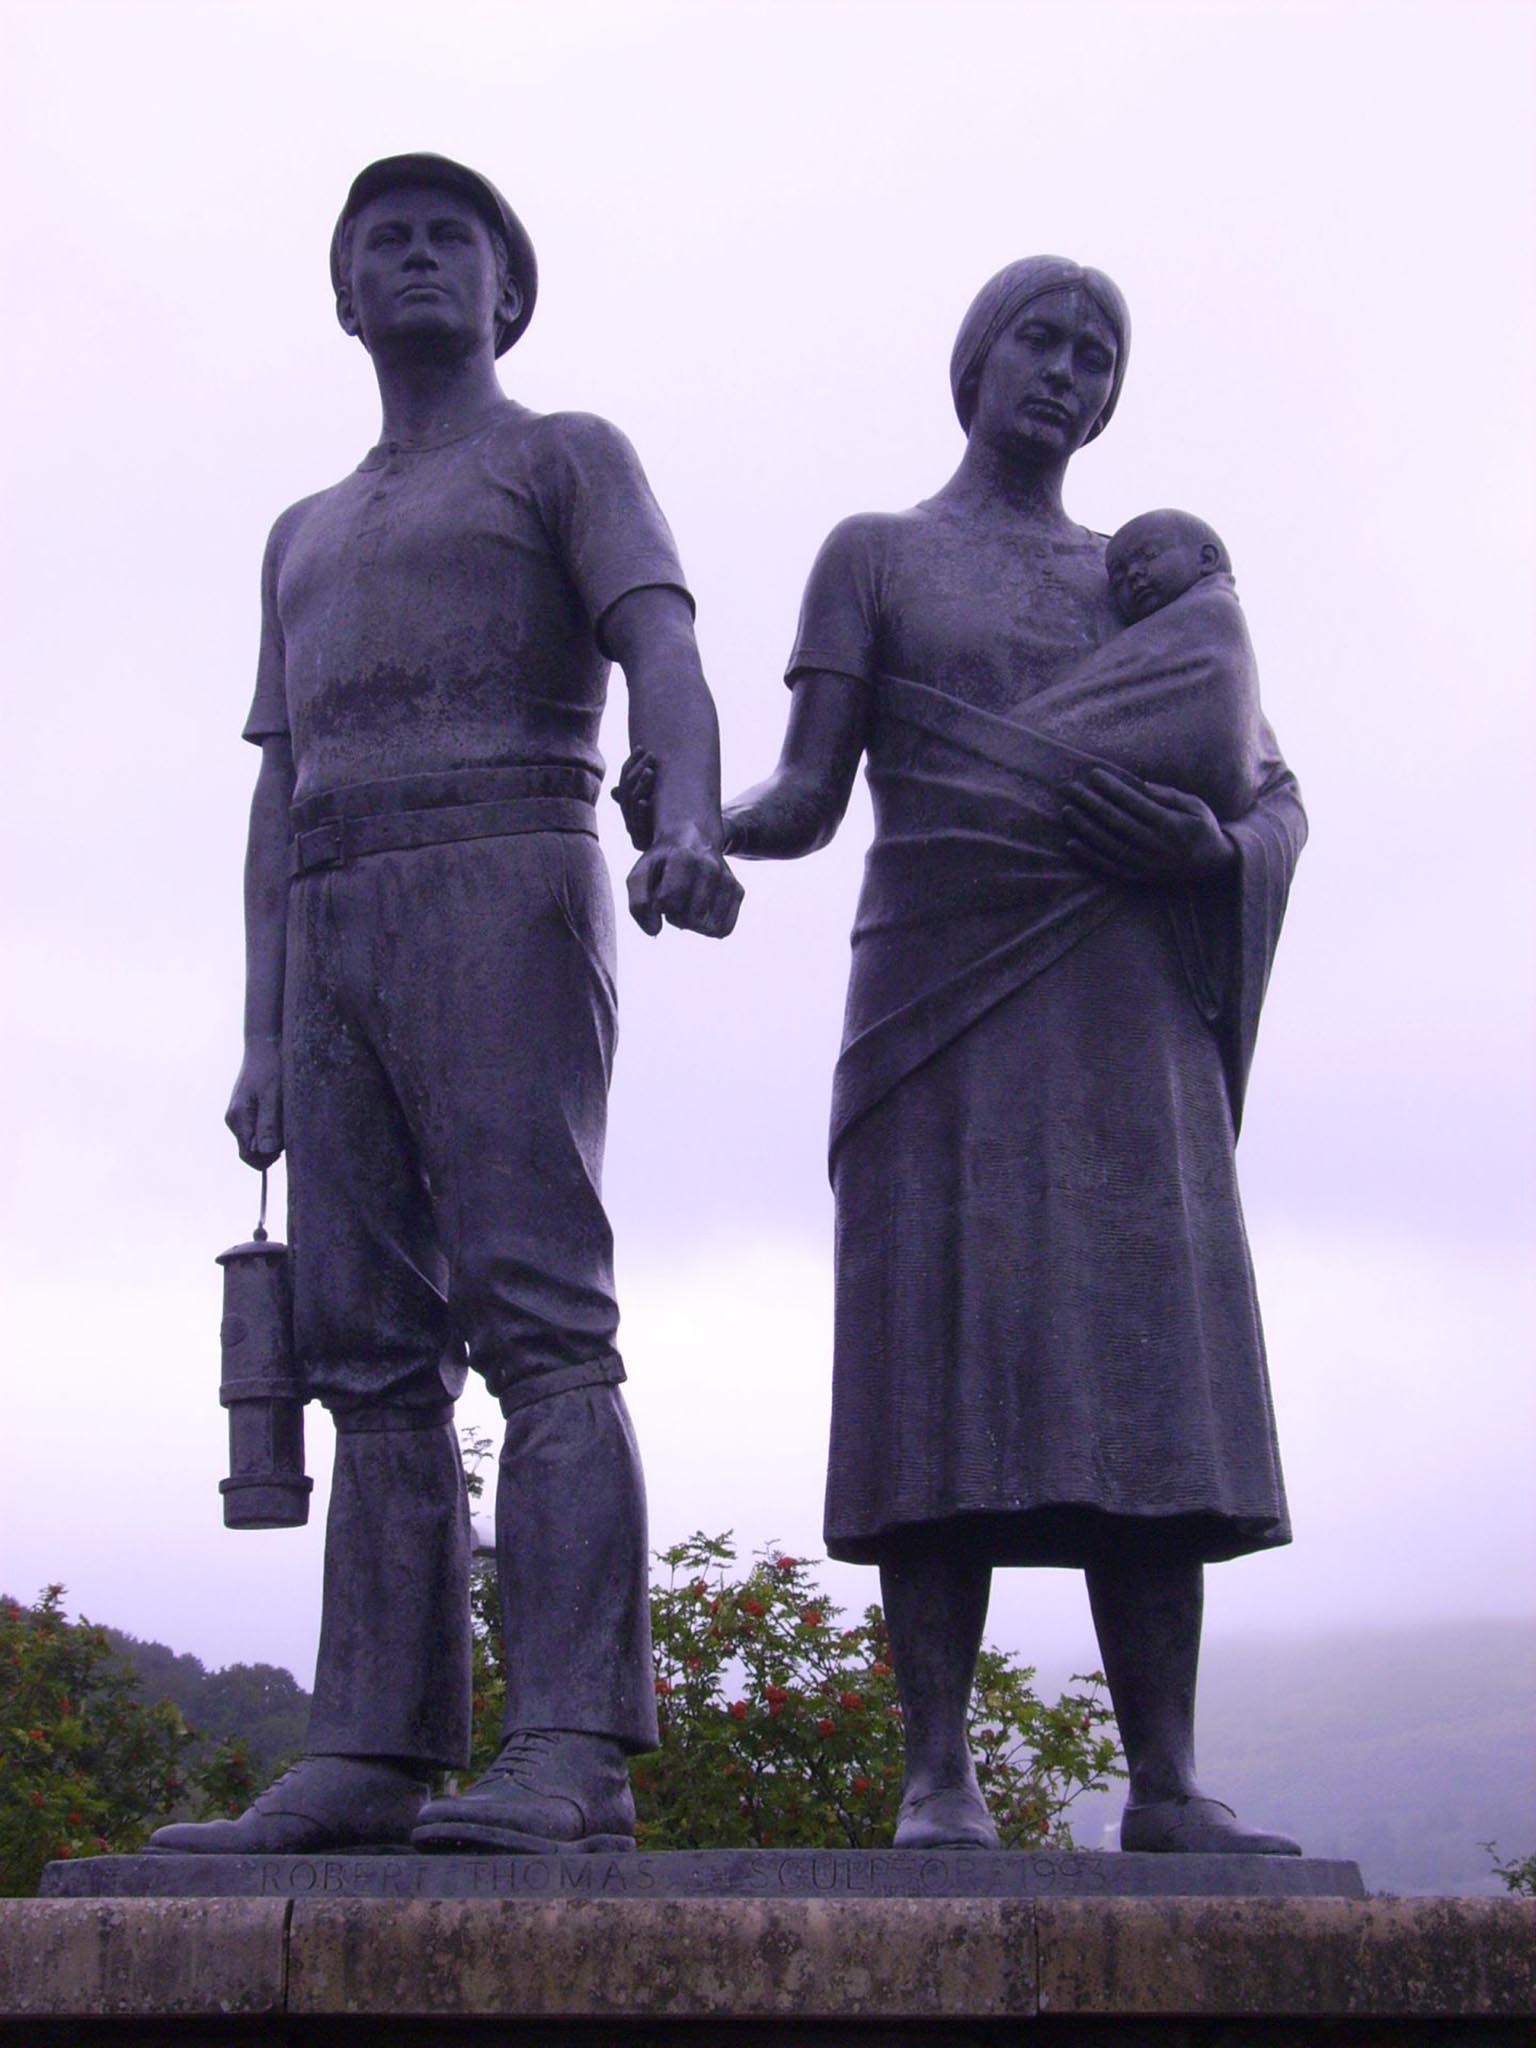 Robert Thomas’s commemorative statue to the miners of the Rhondda was unveiled a century after the Great Western disaster